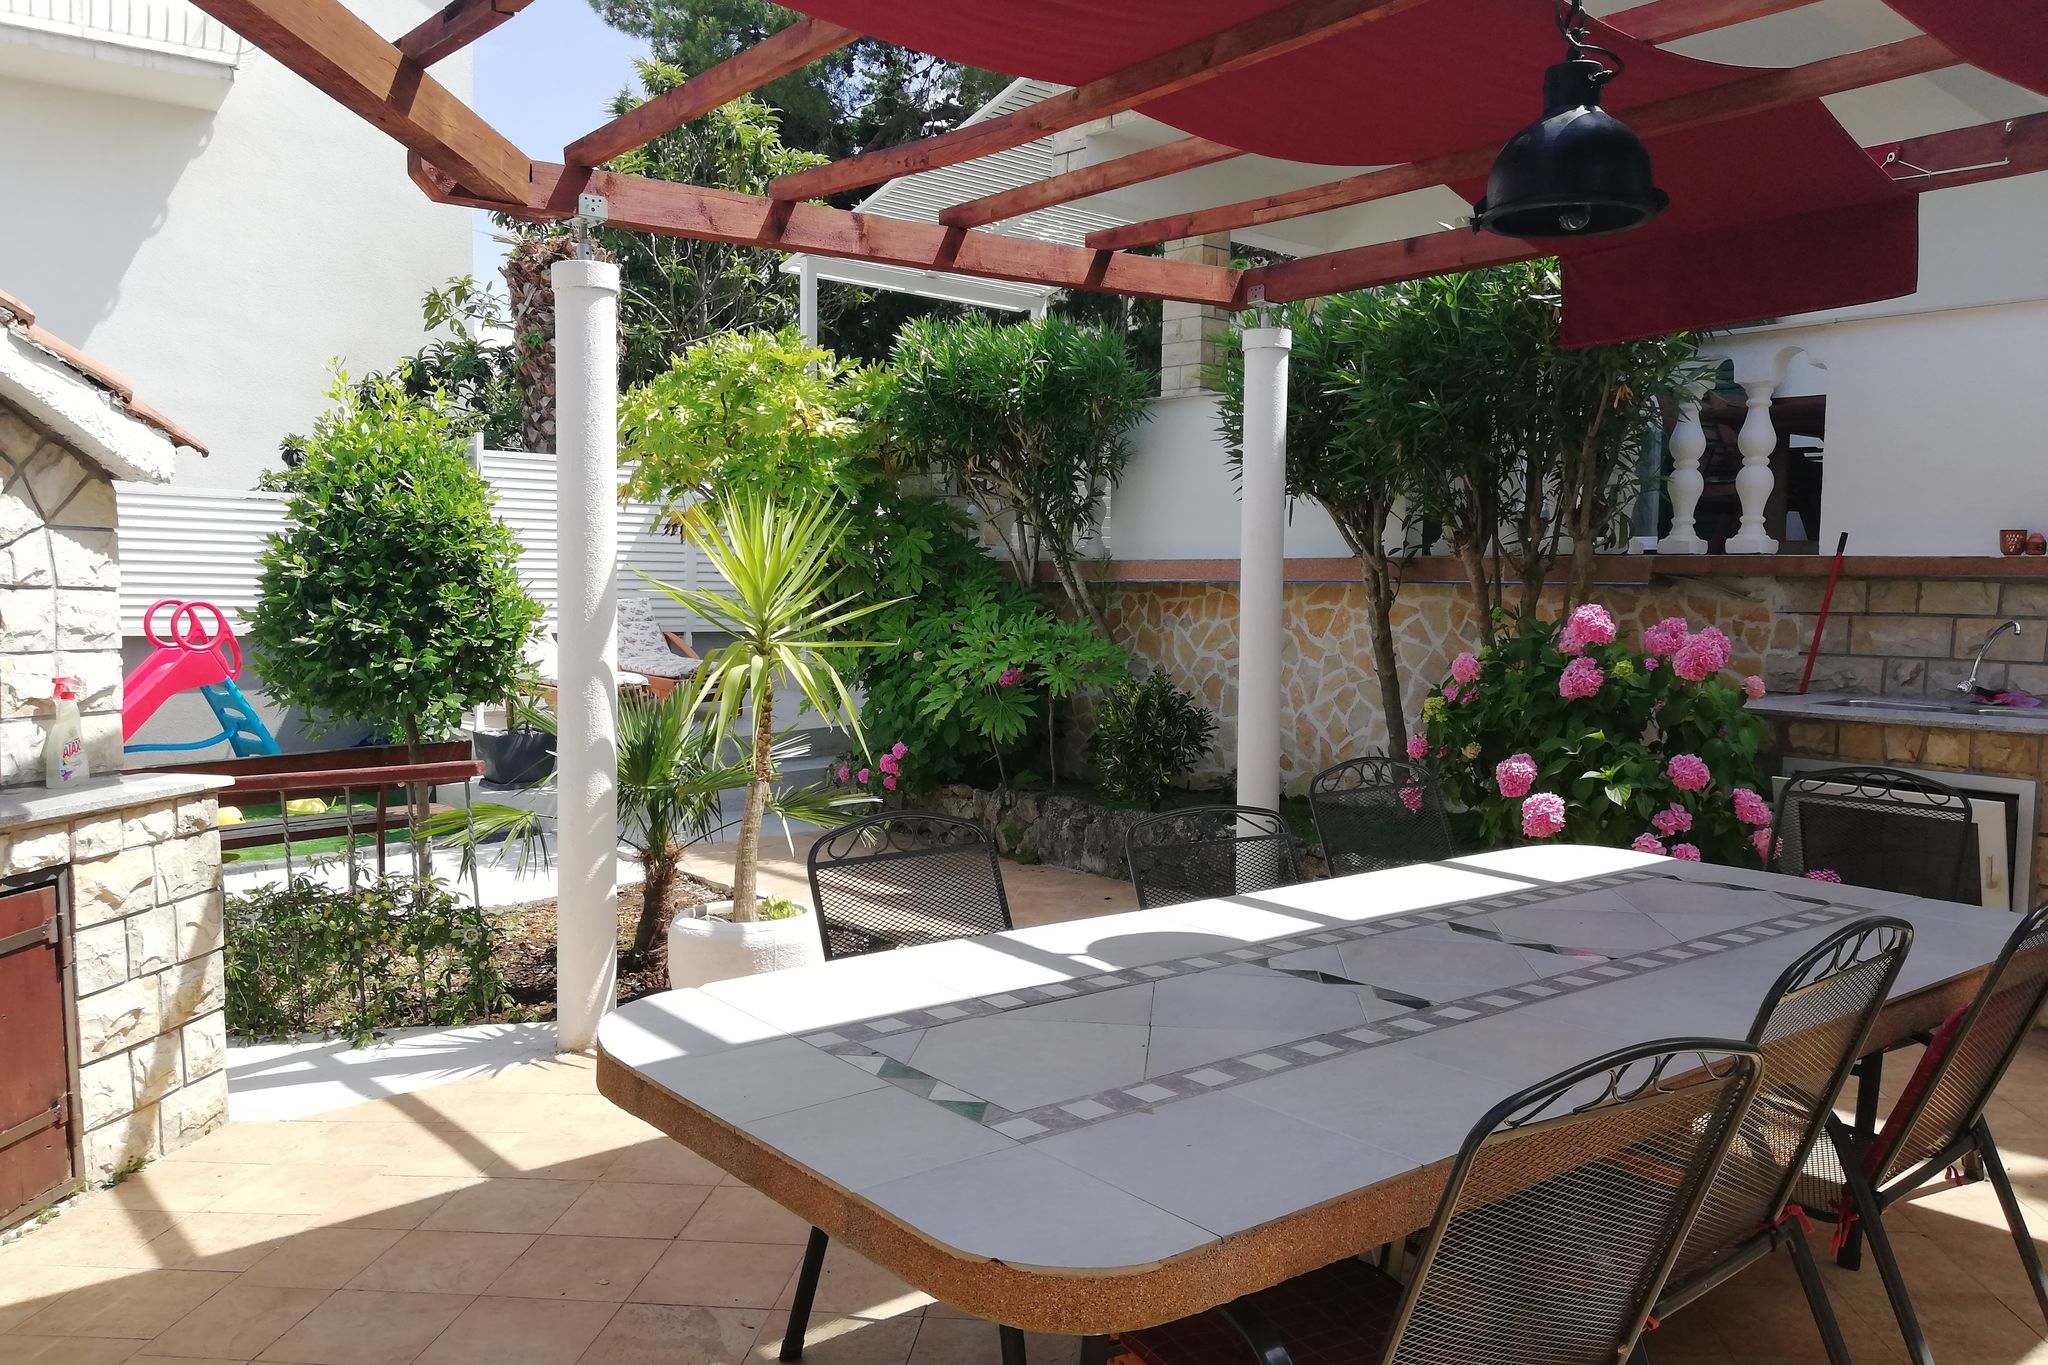 Holiday apartment with a private terrace & jacuzzi, minutes away from the beach